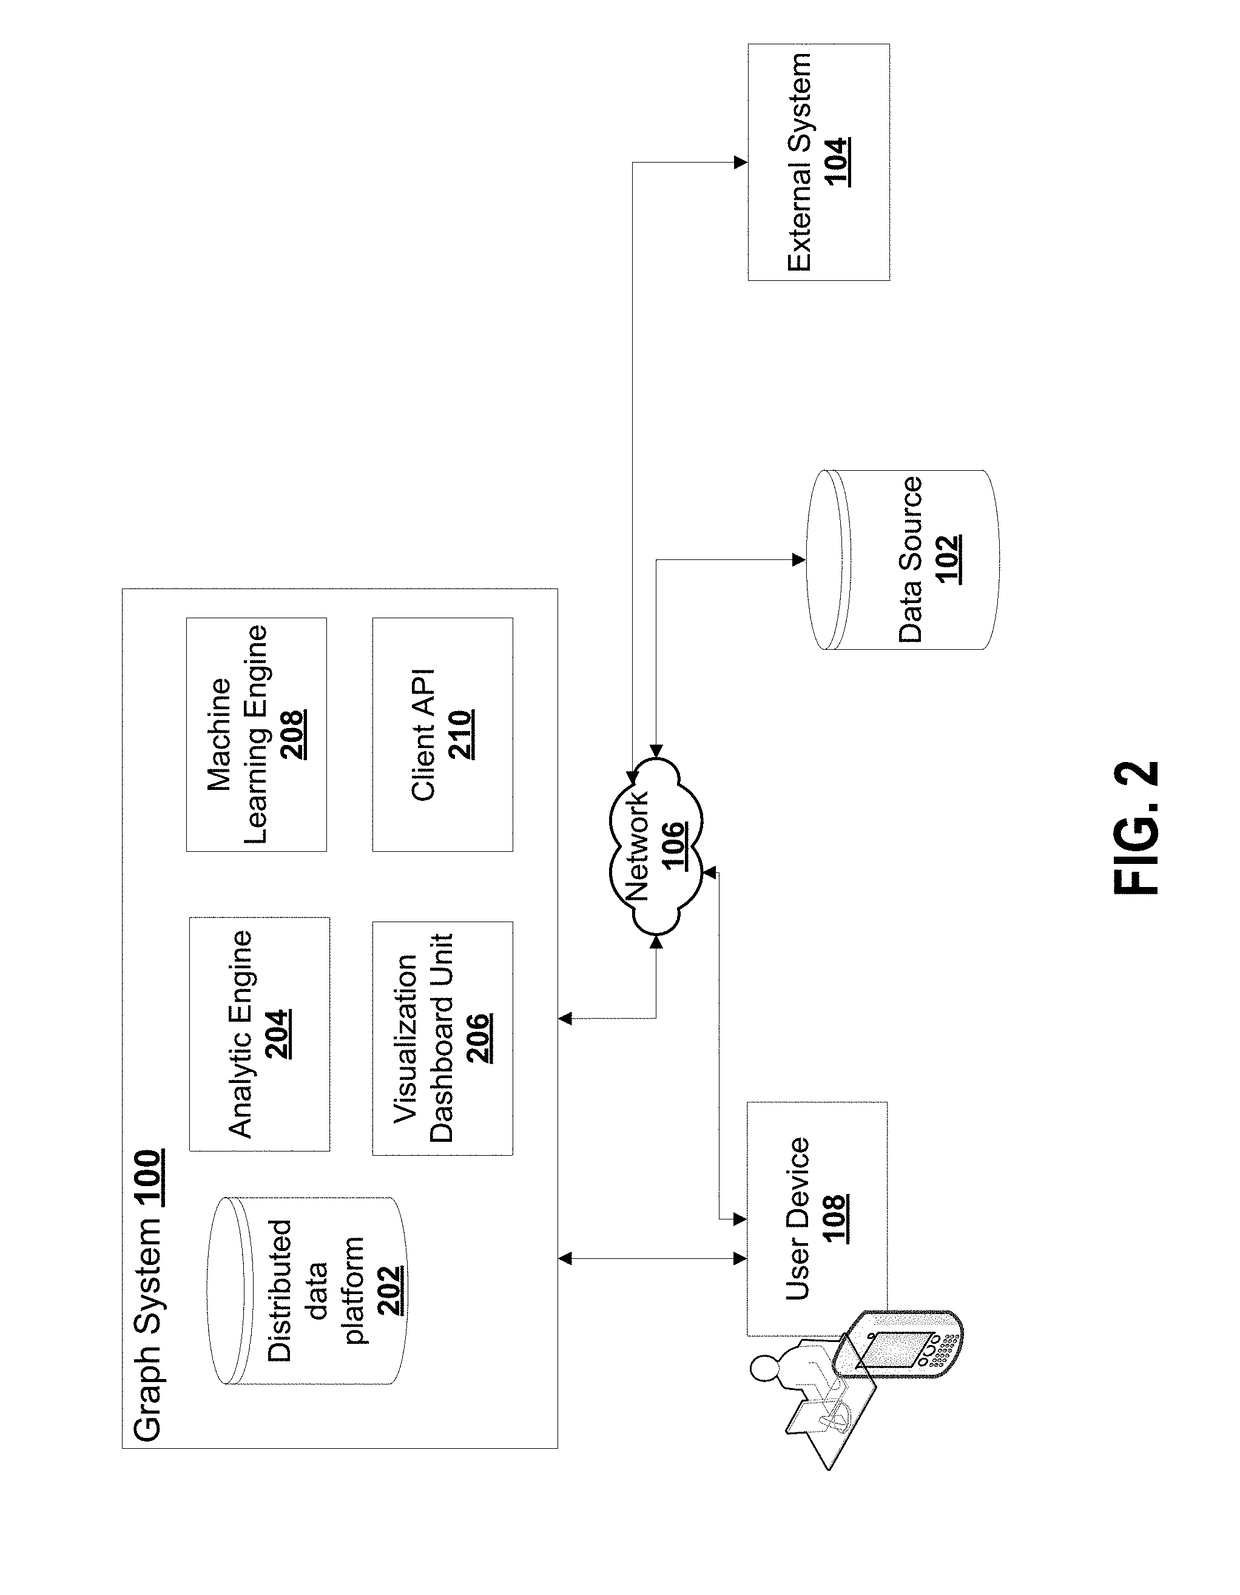 Platform, system, process for distributed graph databases and computing